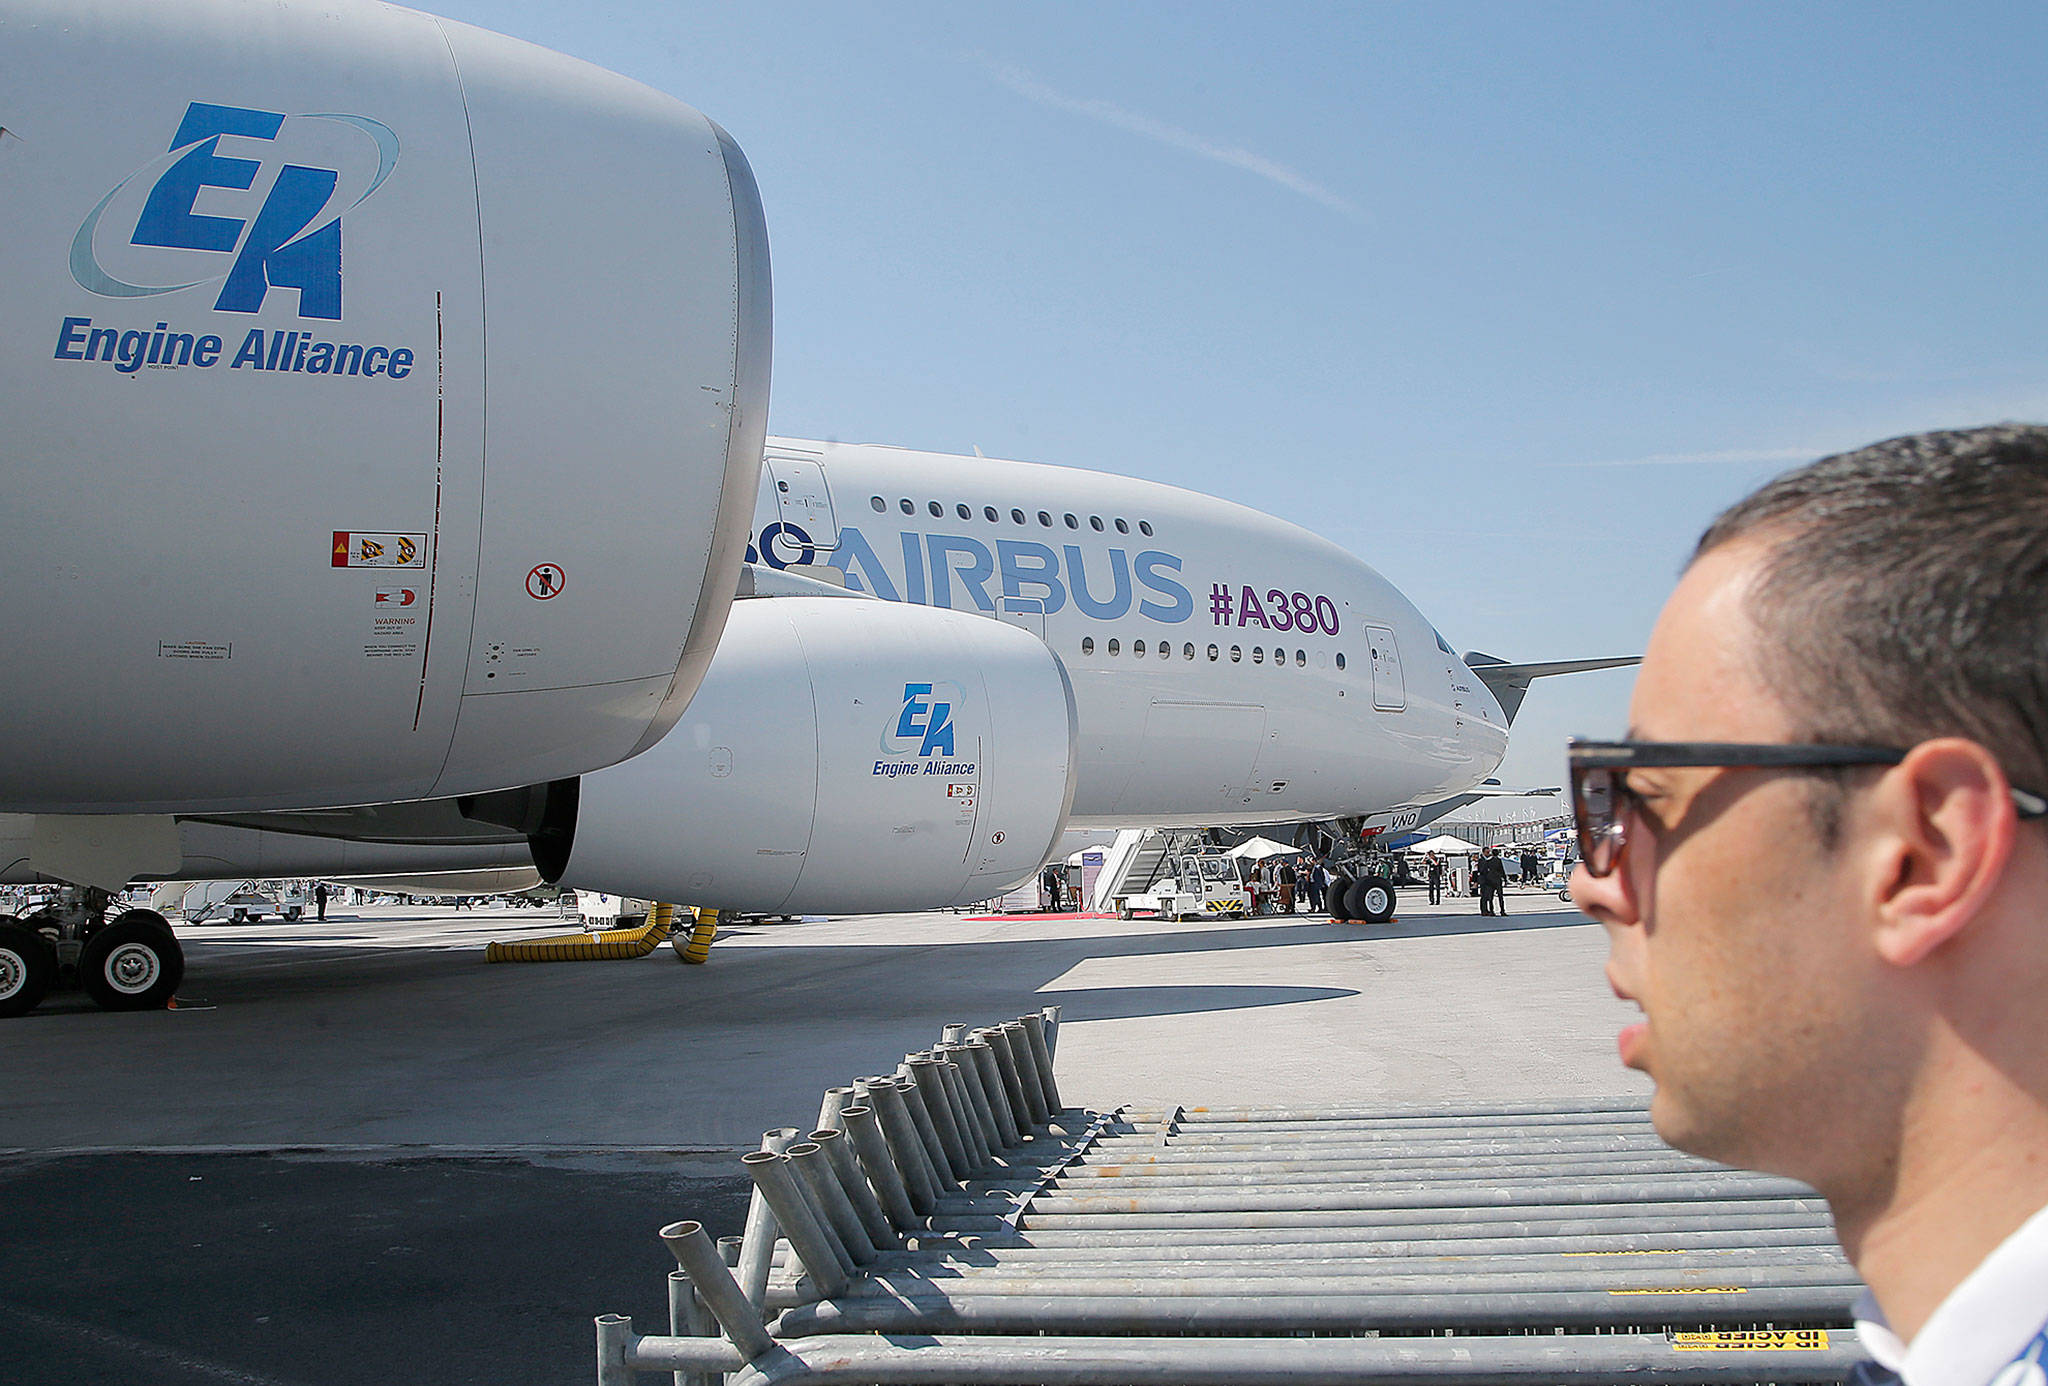 A man looks at an Airbus A380 at the Paris Air Show in Le Bourget, France, last June. (AP Photo/Michel Euler)